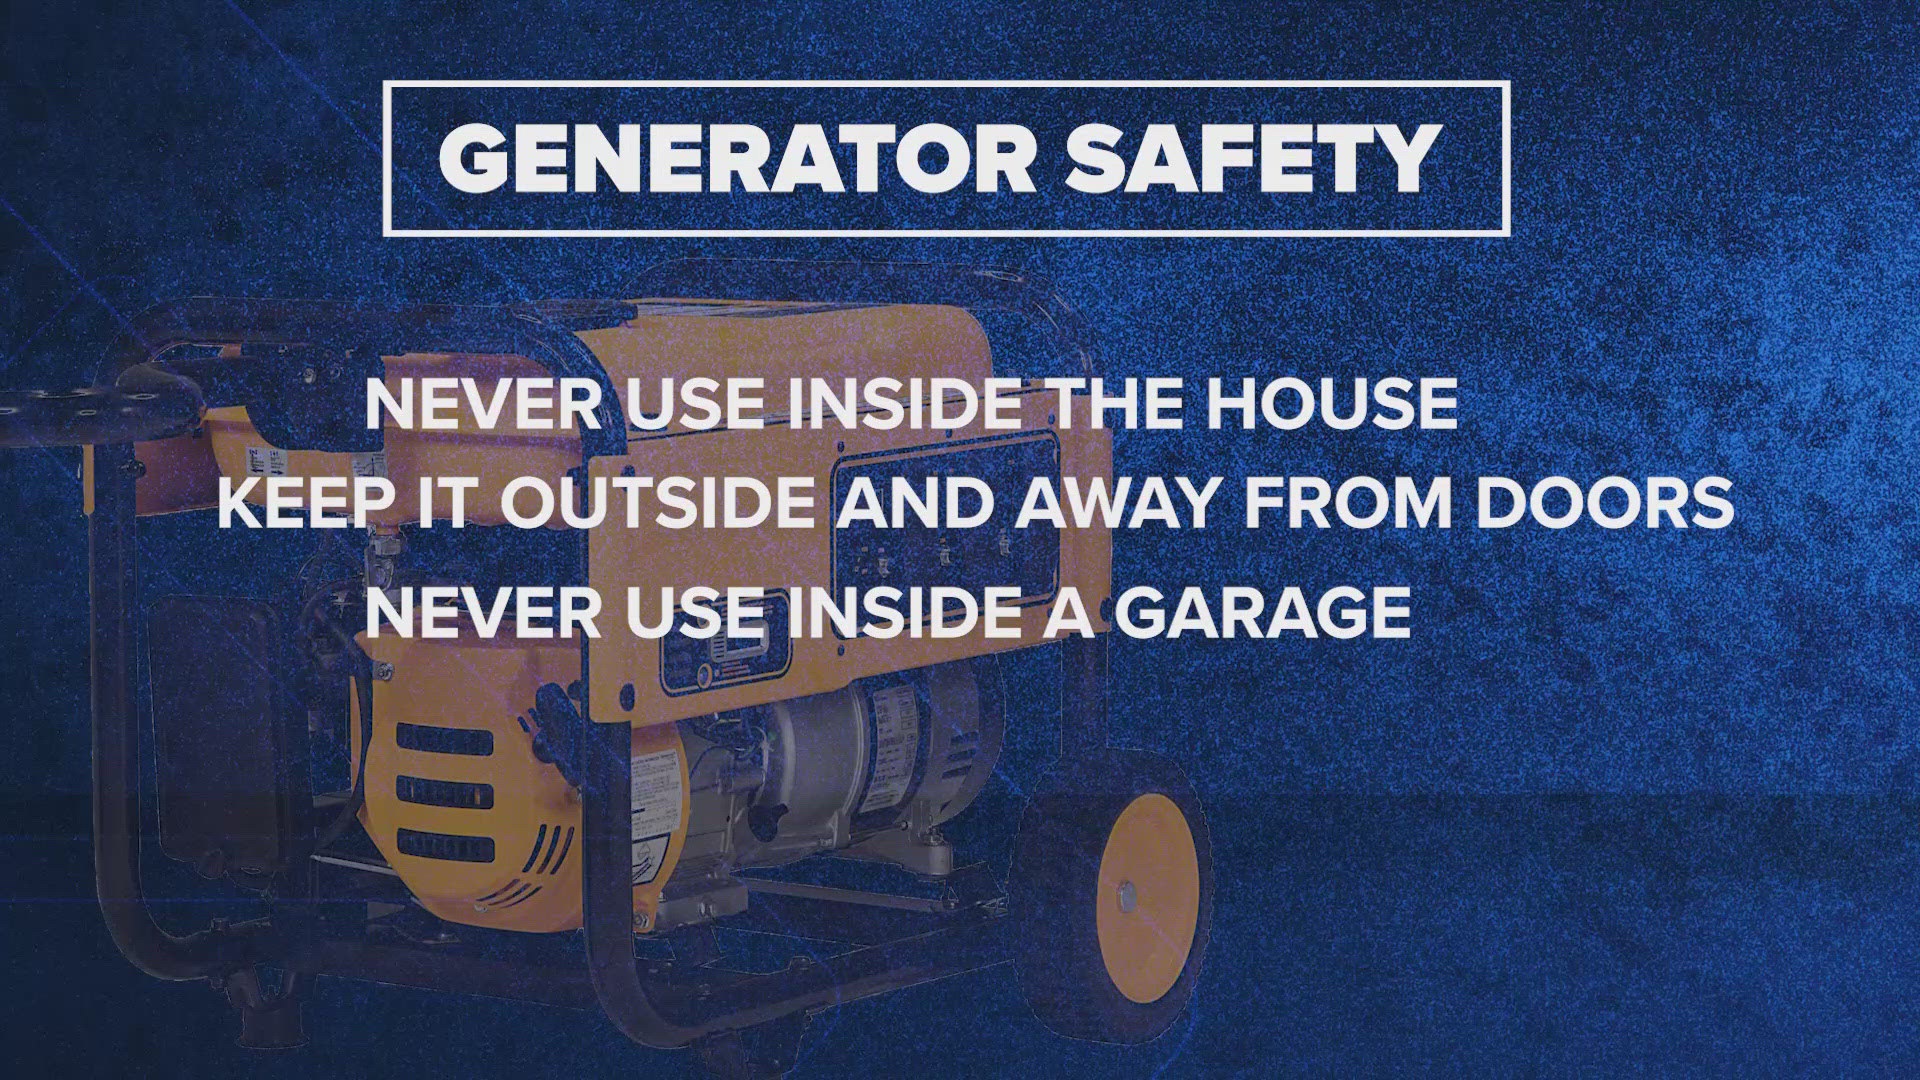 Misusing generators can be dangerous and even deadly.